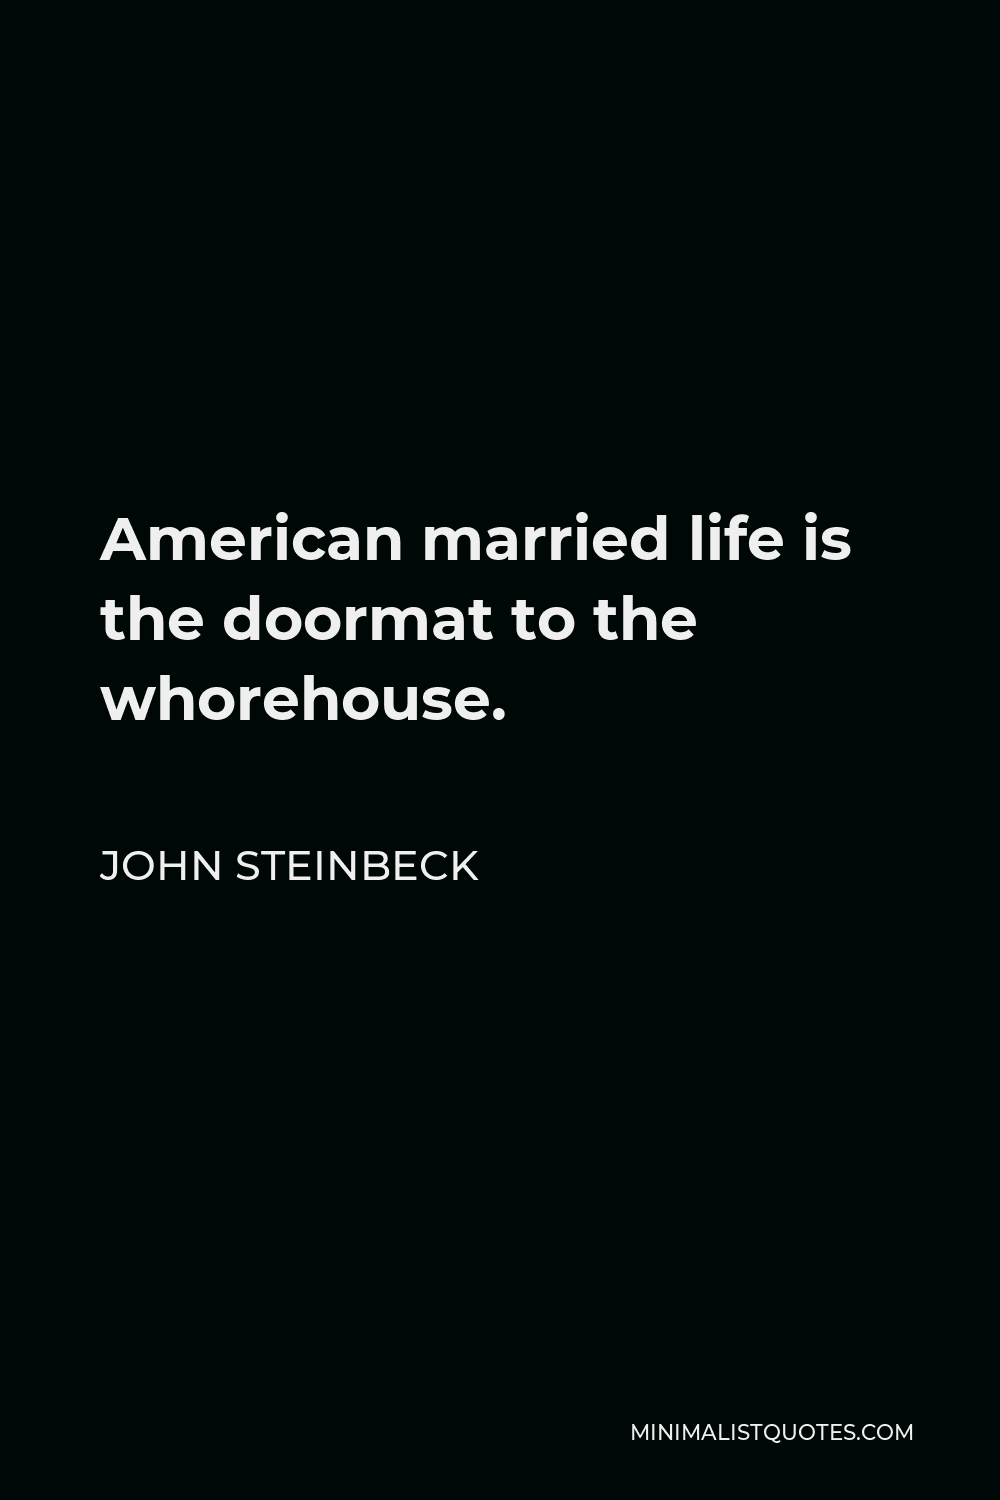 John Steinbeck Quote - American married life is the doormat to the whorehouse.